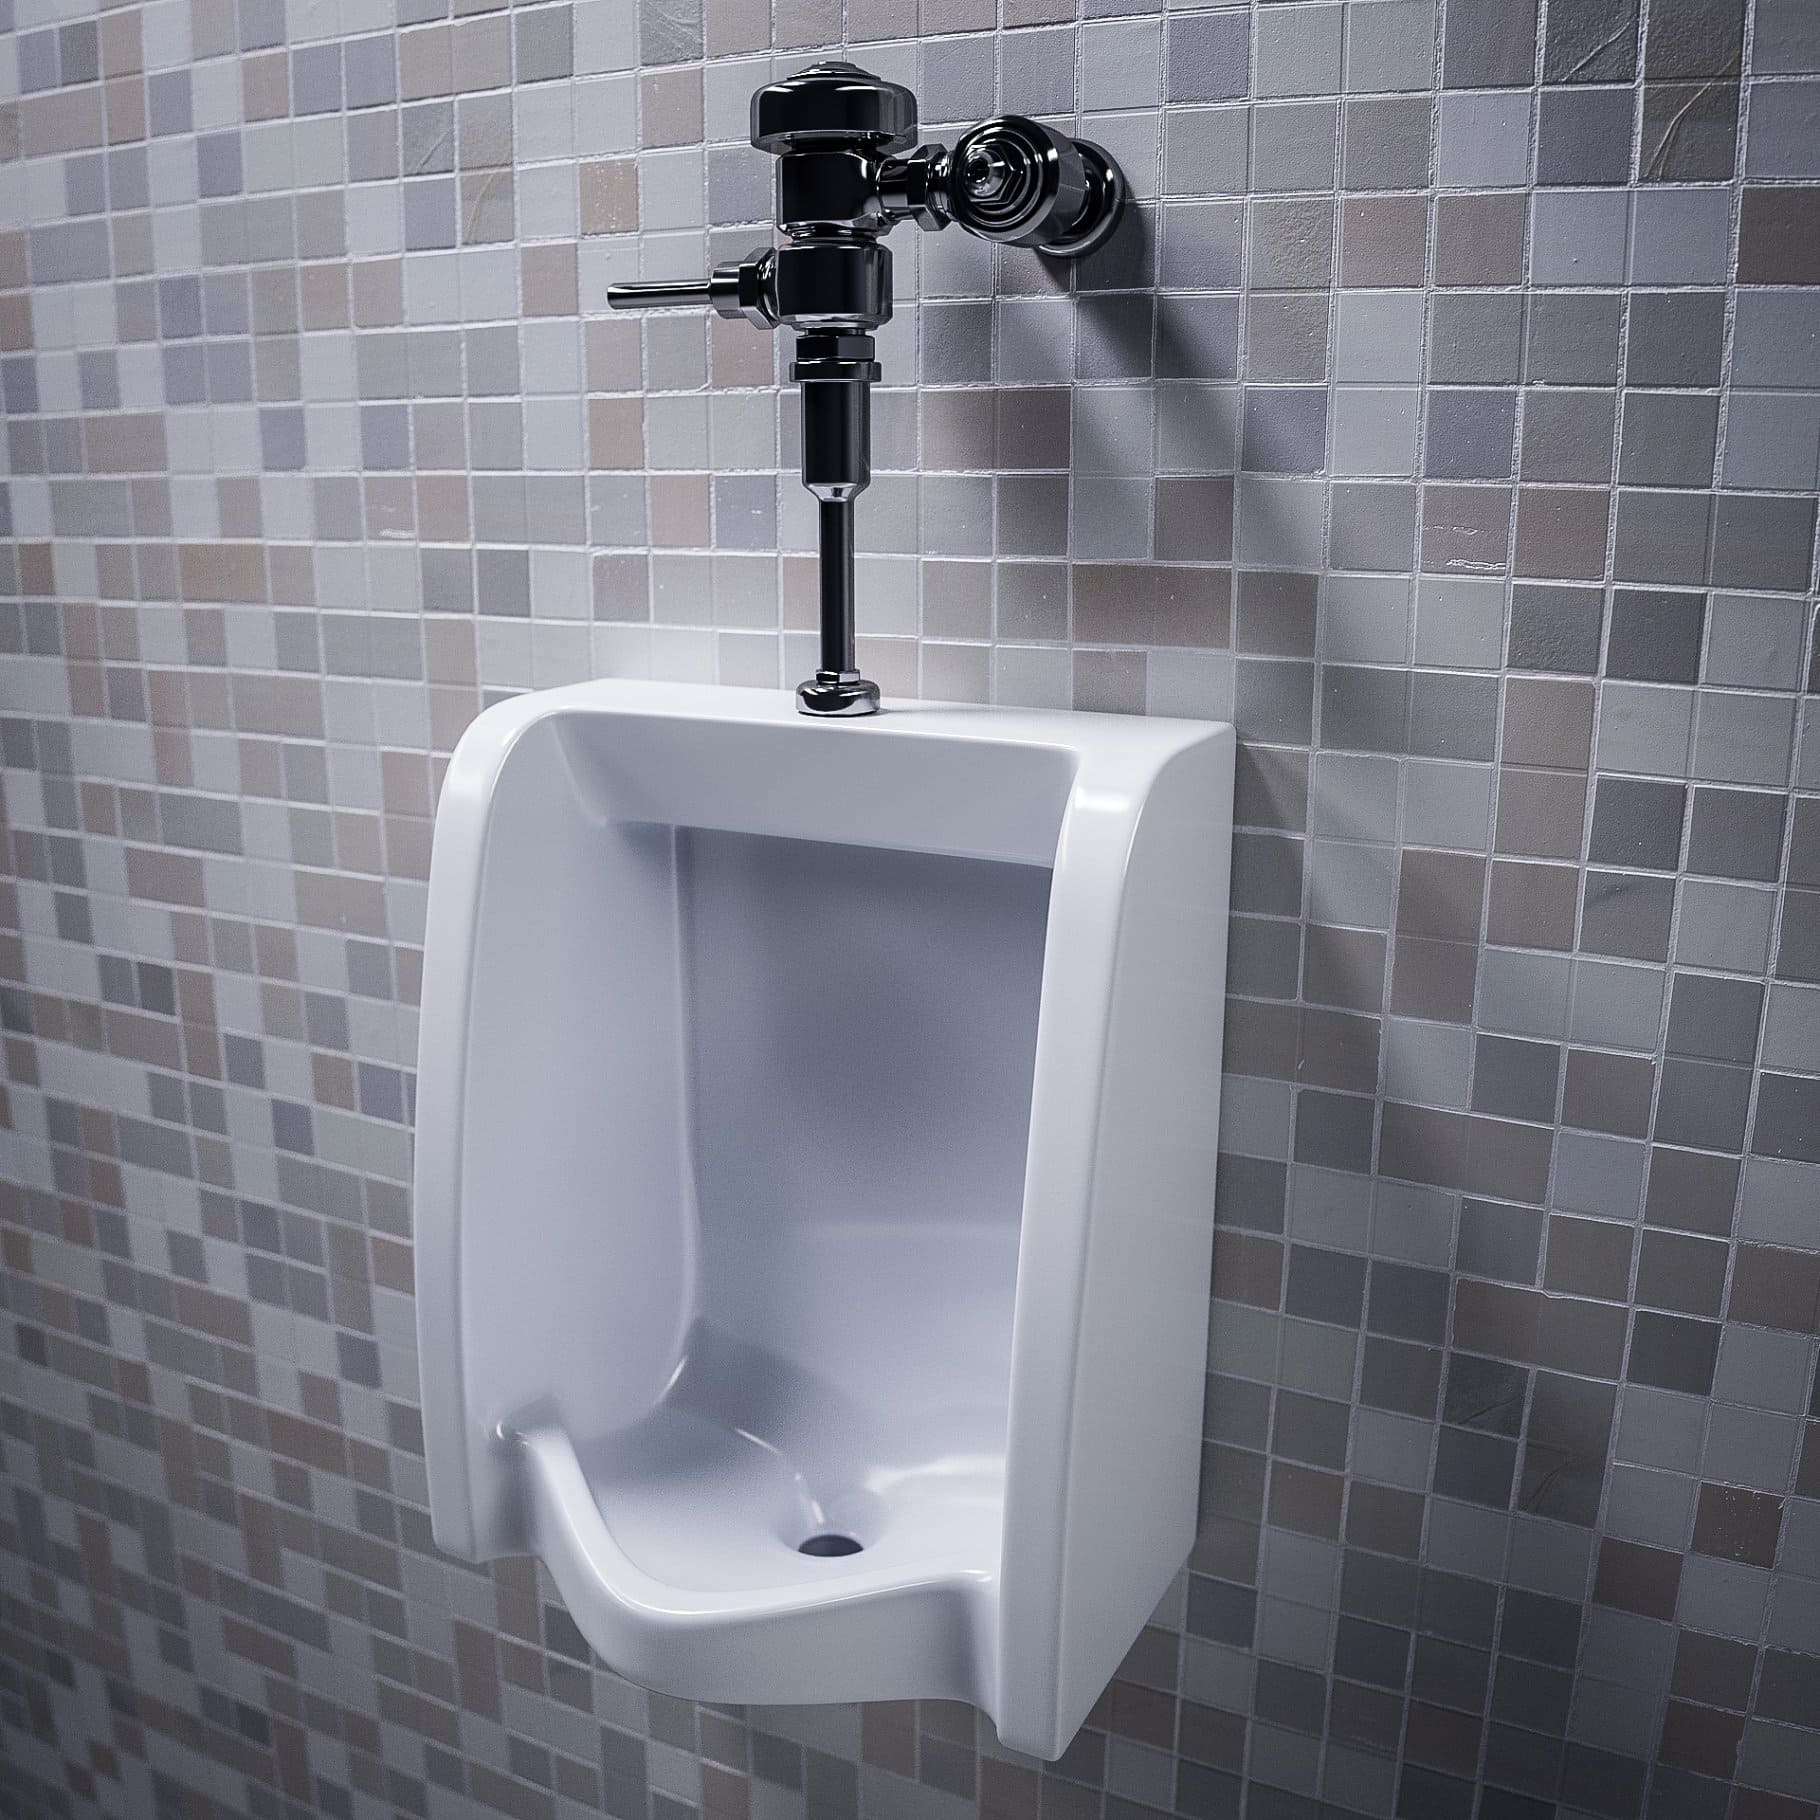 Urinal, main picture.